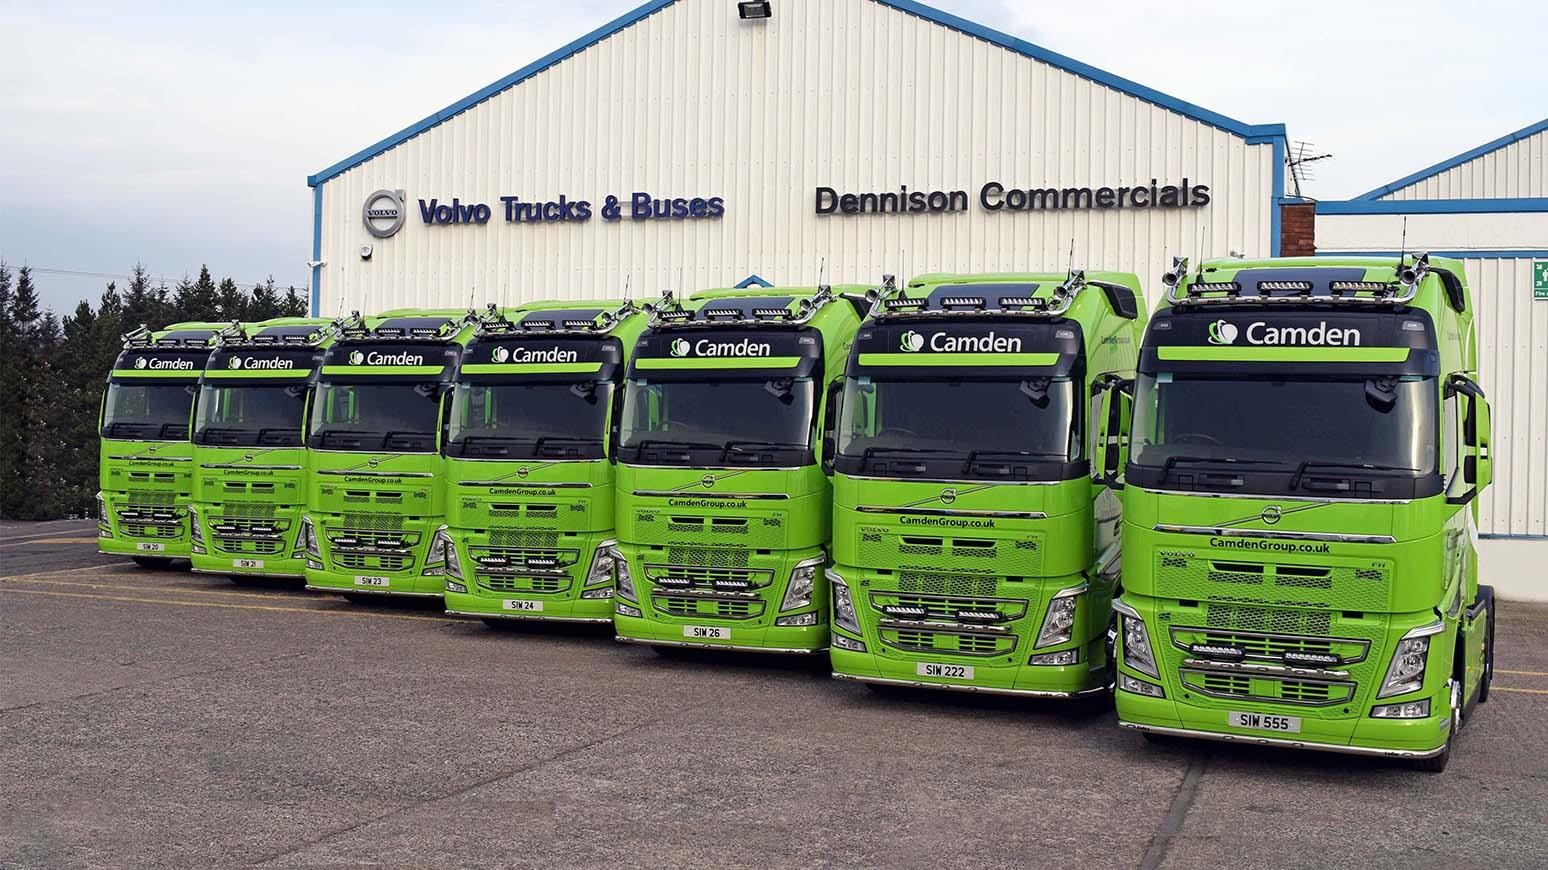 Northern Ireland Company Adds Seven New Volvo FH Trucks To Its Fleet